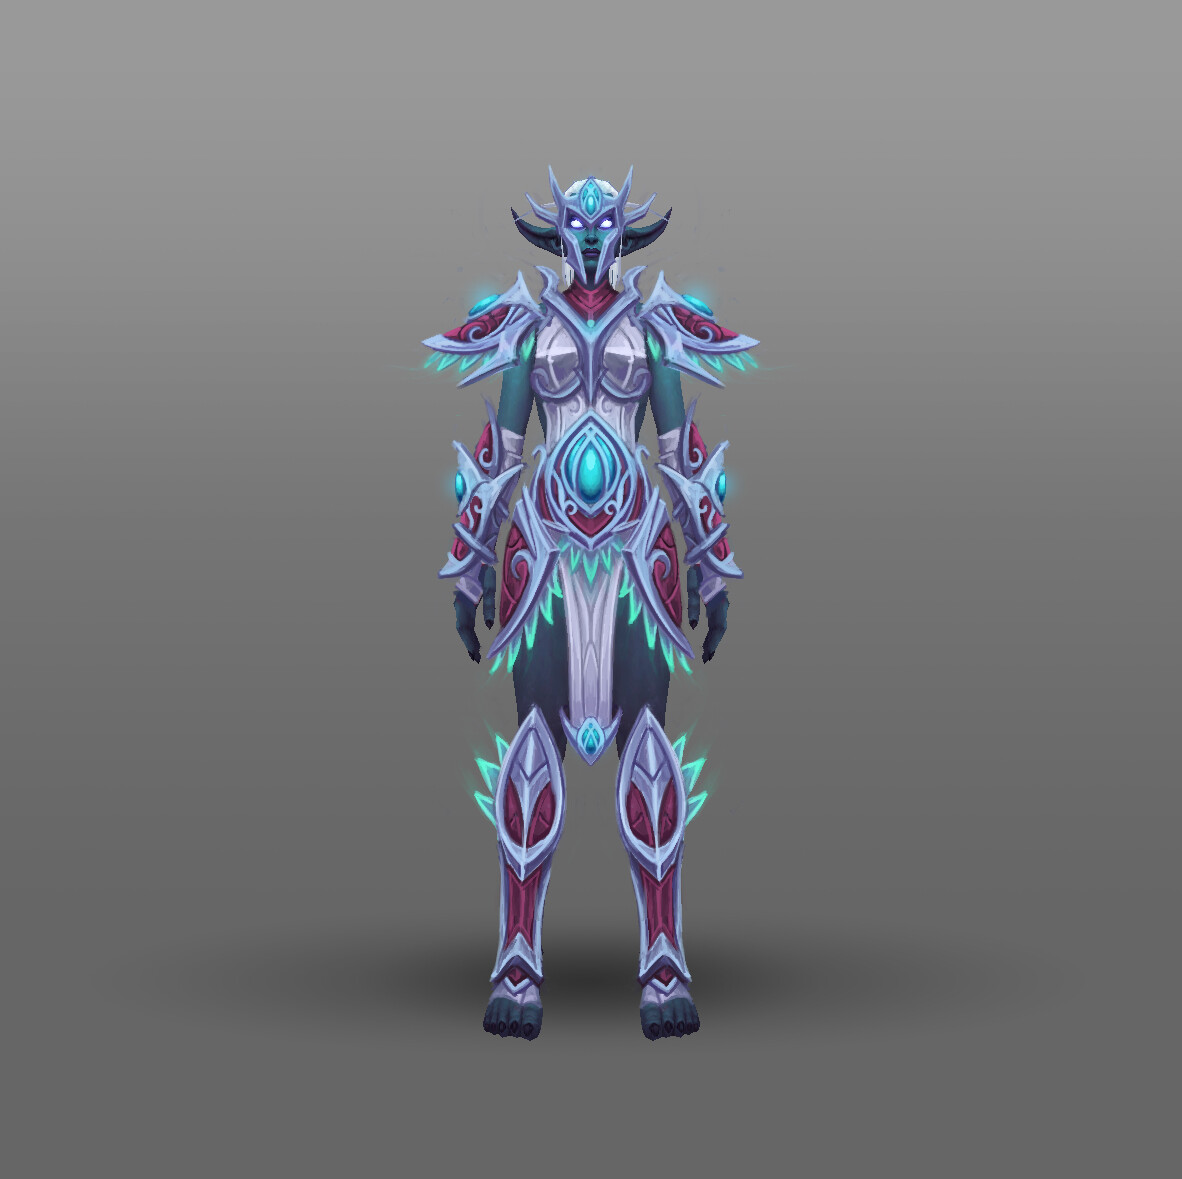 Monk
This design is based on the Arcan'dor tree. As storywise it represents the nightborne being freed from their mana thirst, I felt it would be a good fit for the monk.